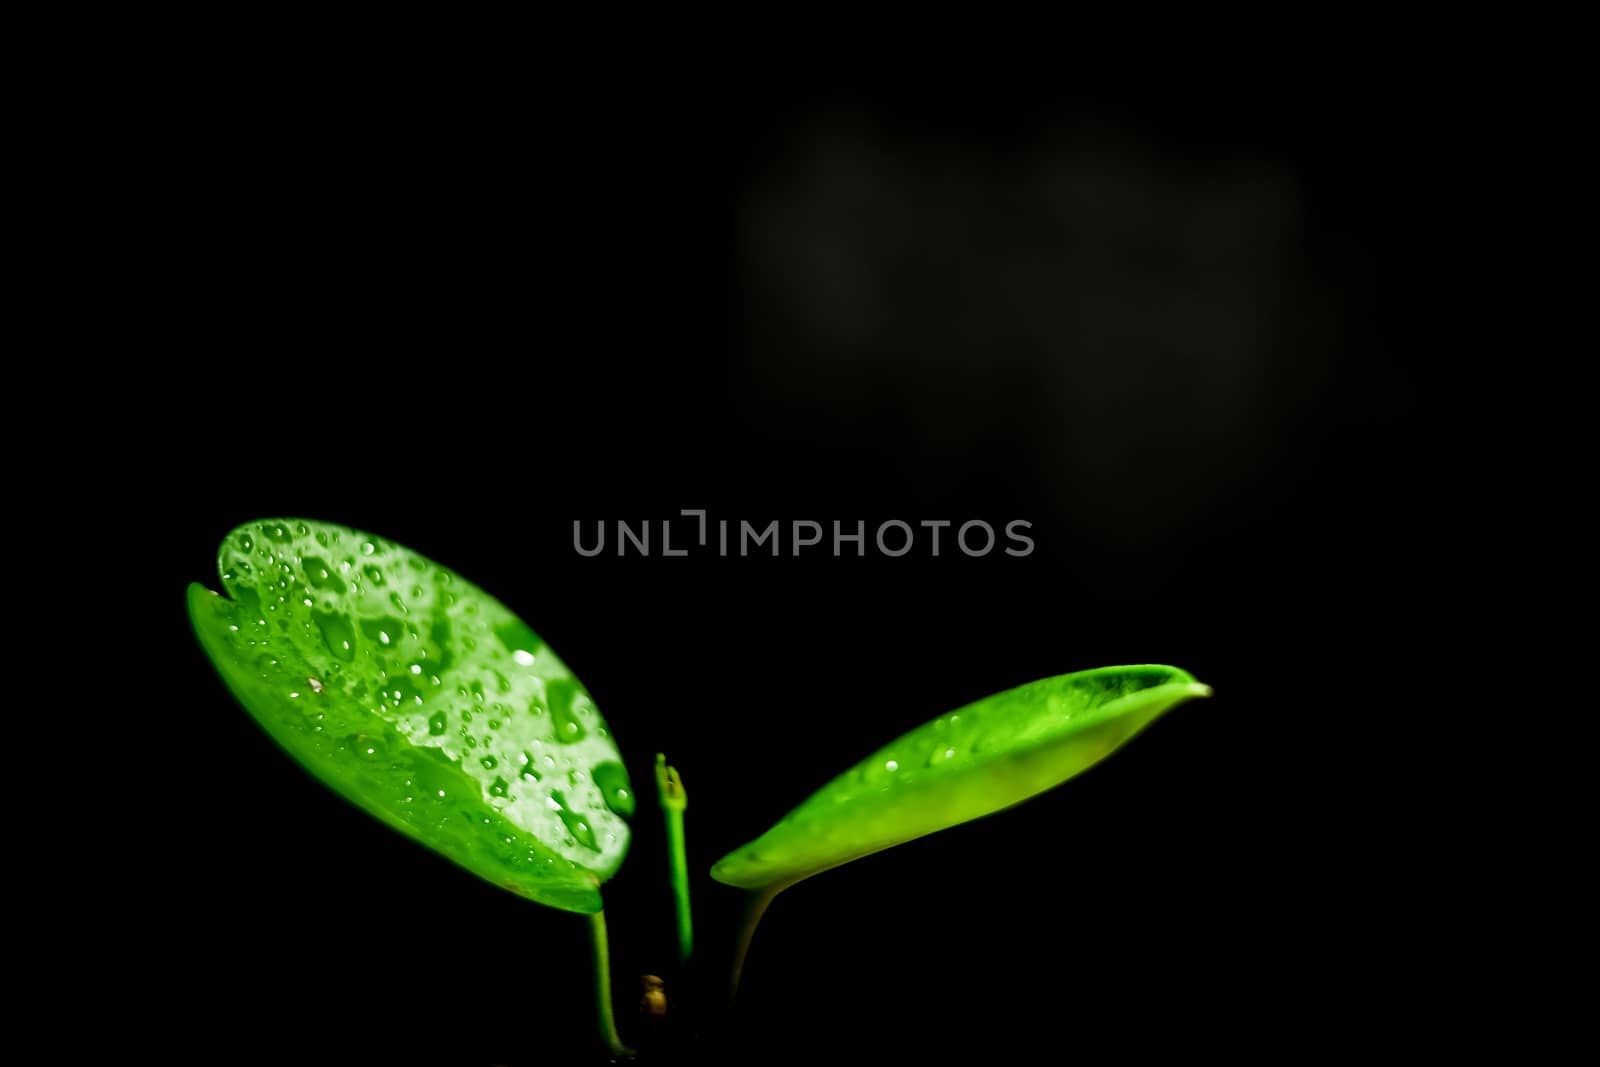 A close-up shot of light green leaves and a black background.